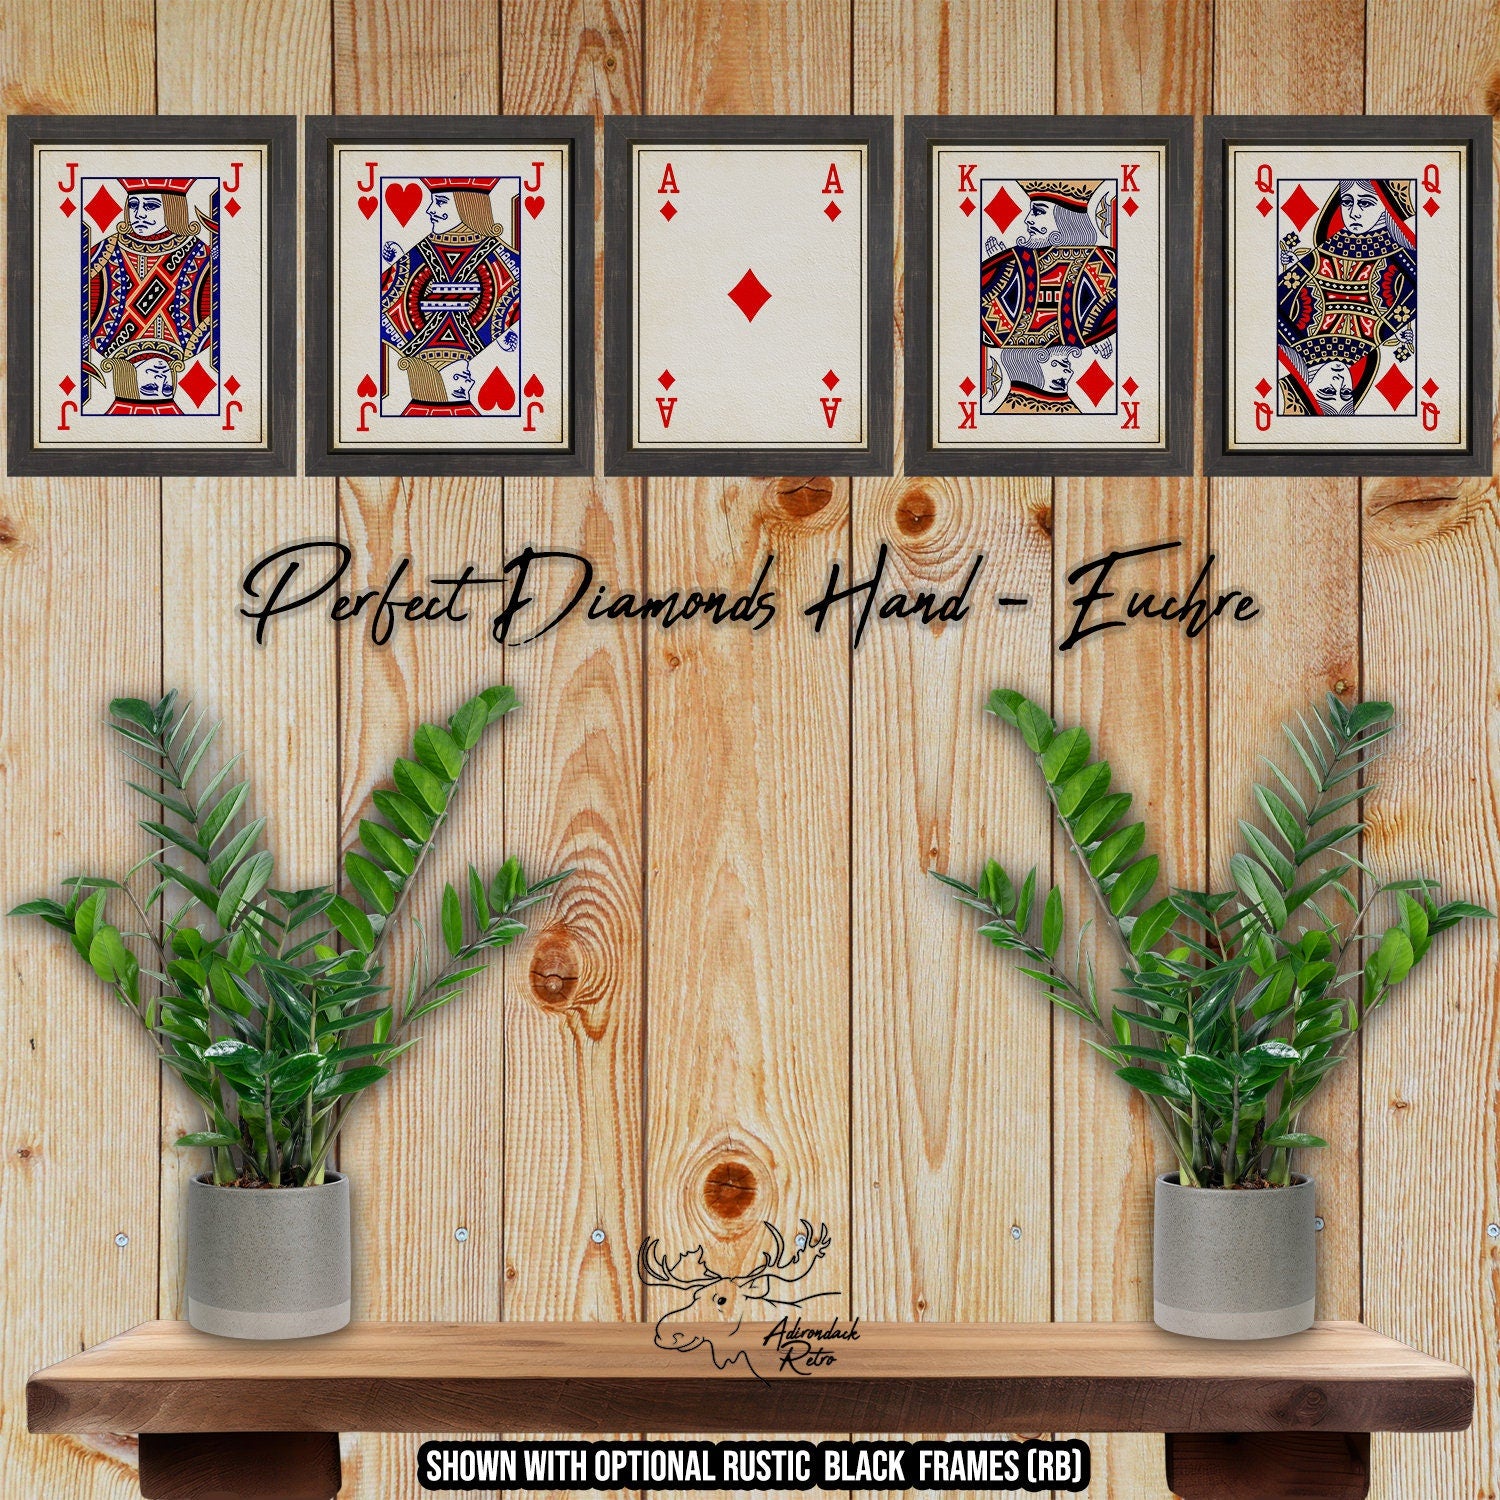 Euchre Playing Card Prints - Perfect Diamonds Hand Playing Card Posters at Adirondack Retro